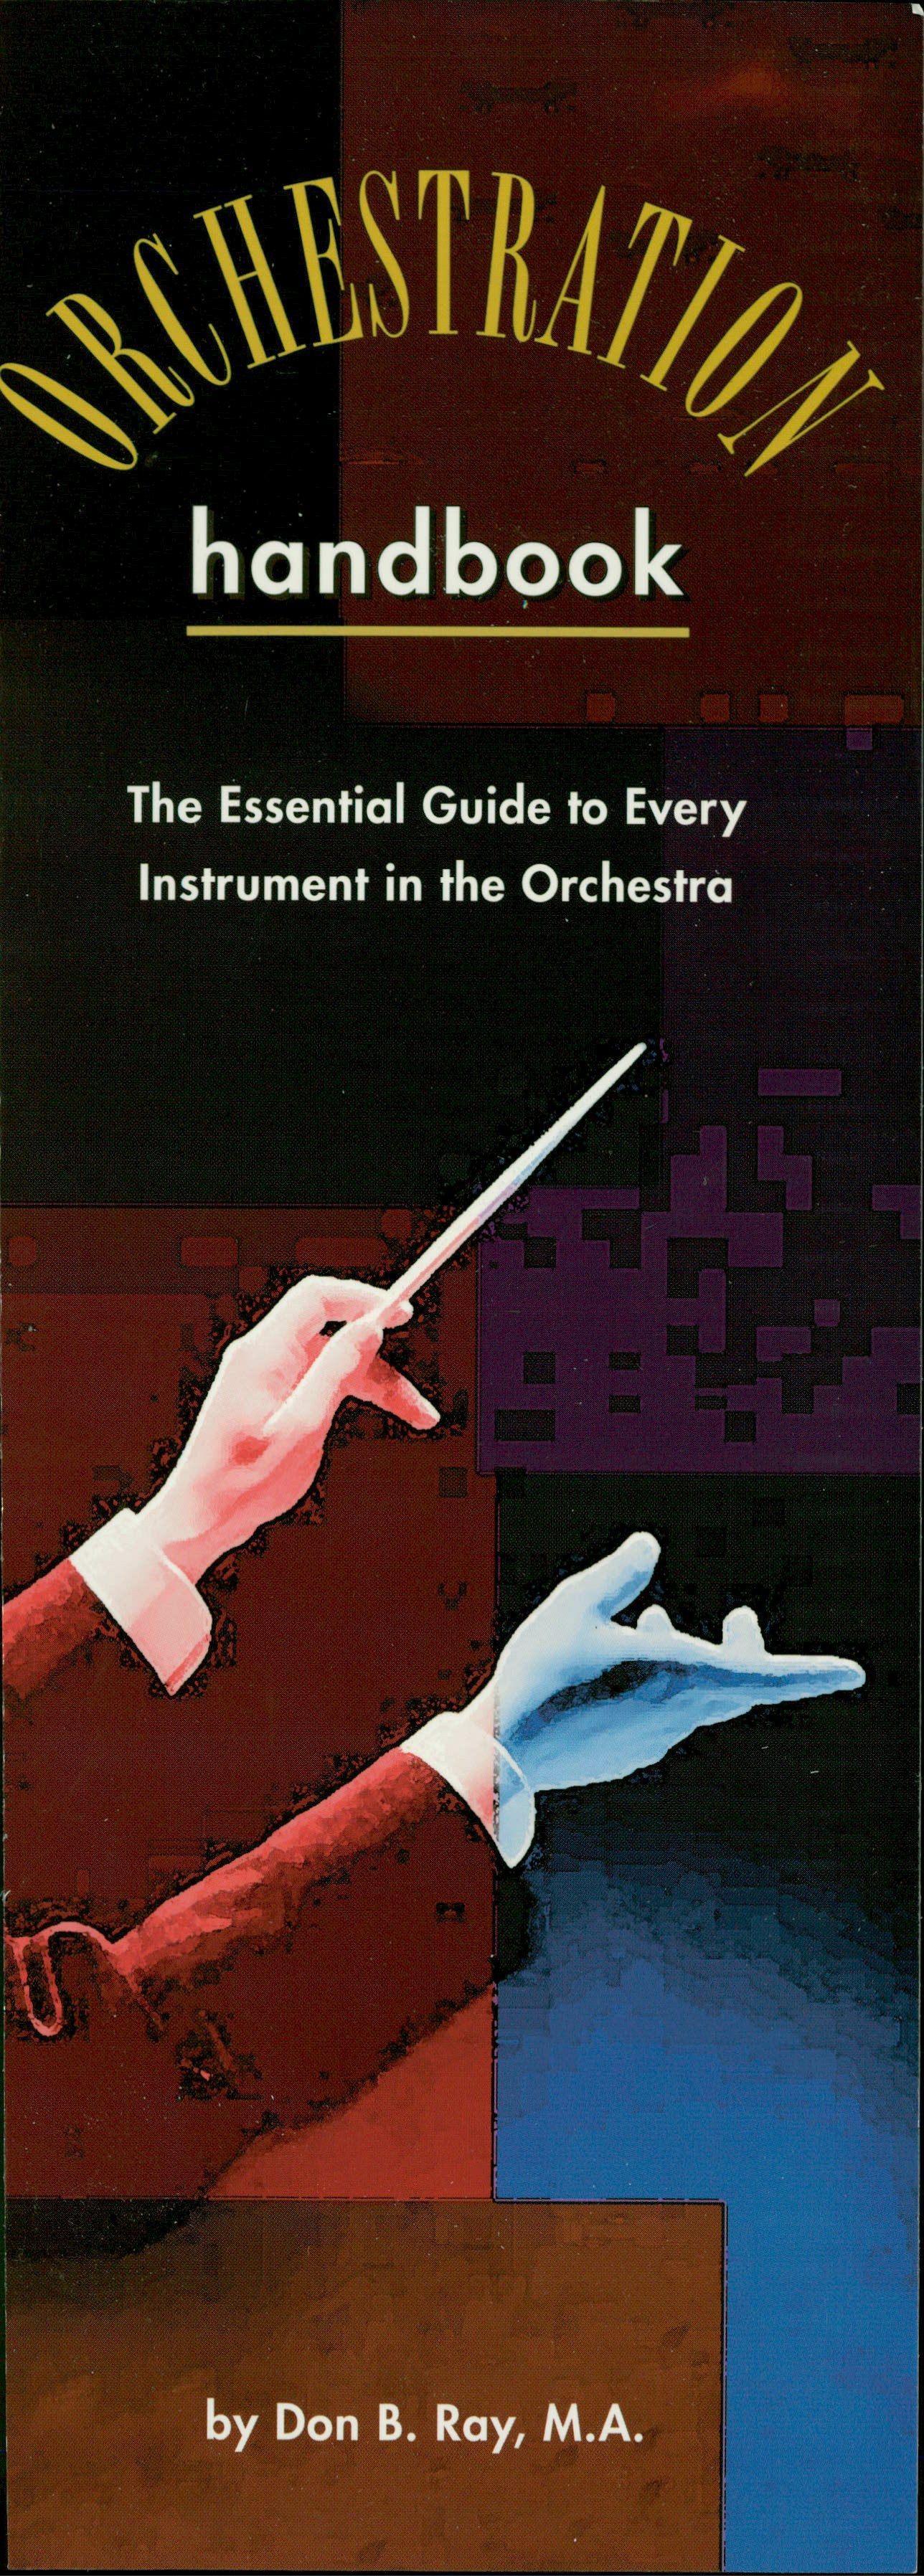 The Orchestration Handbook: The Essential Guide to Every Instrument in the Orchestra